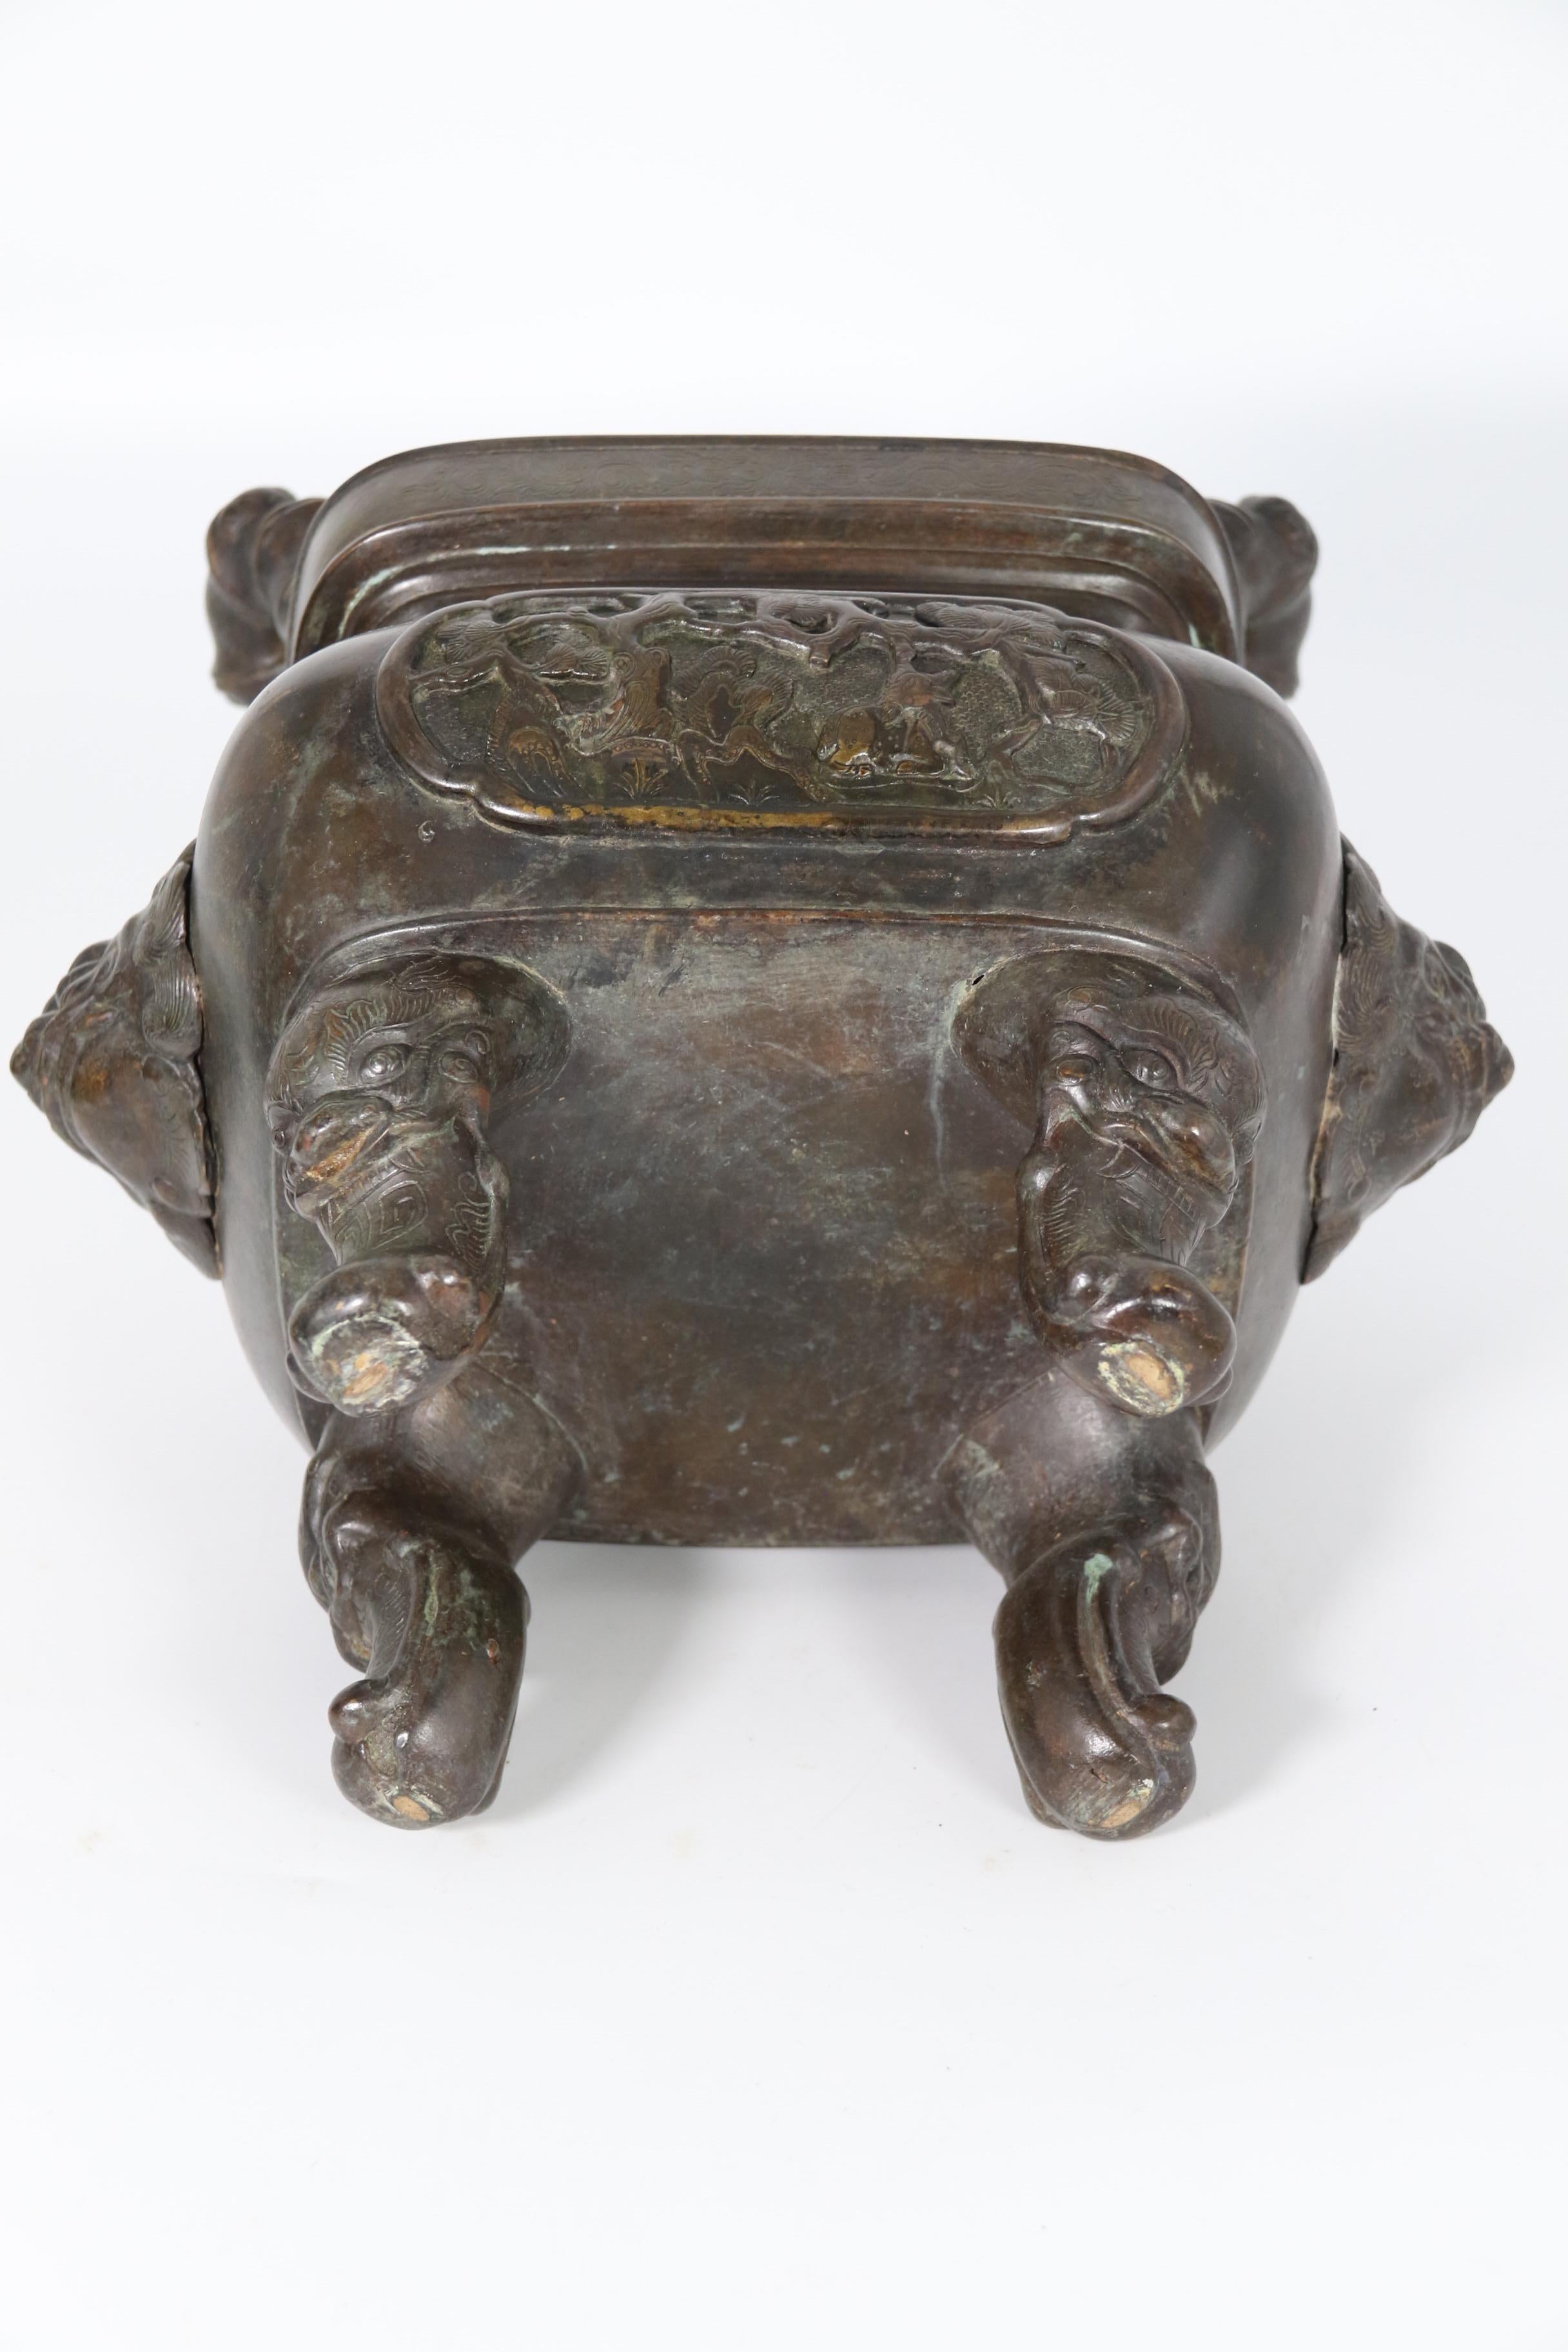 19th century Chinese bronze cencer with Buddhist lion decoration circa 1860 For Sale 9